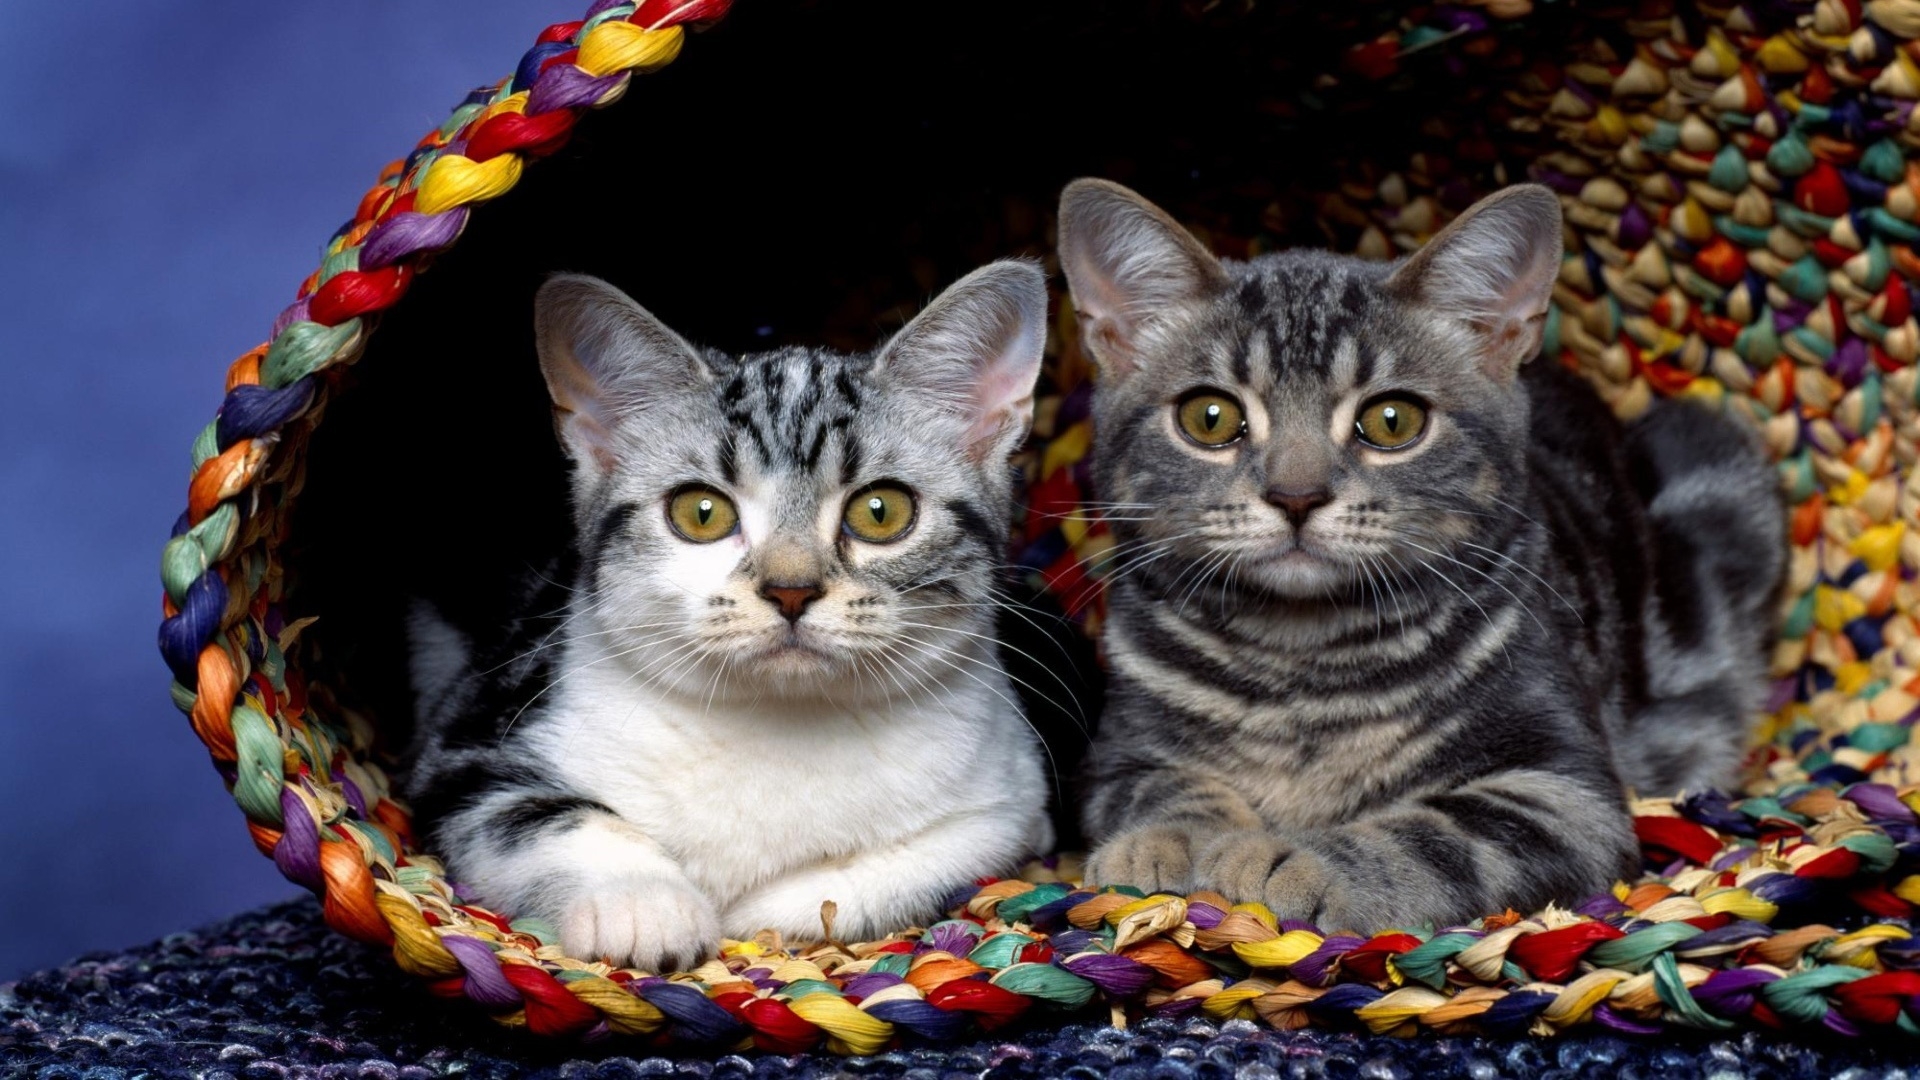 Cats in basket for 1920 x 1080 HDTV 1080p resolution